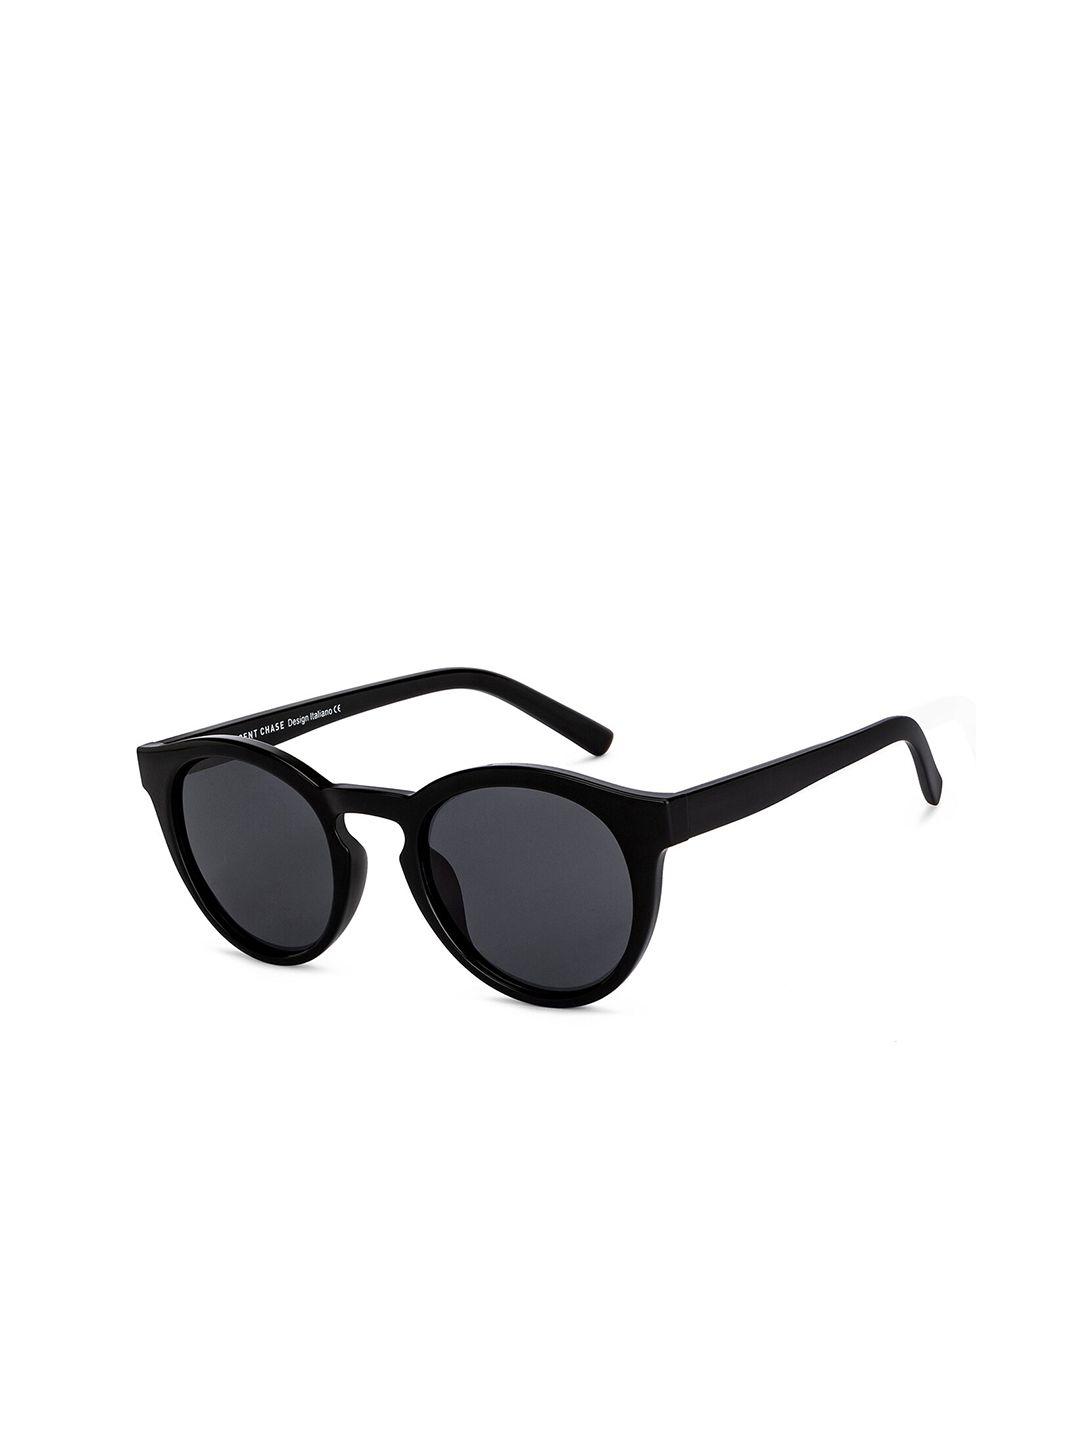 vincent chase unisex grey lens & black round sunglasses with polarised and uv protected lens